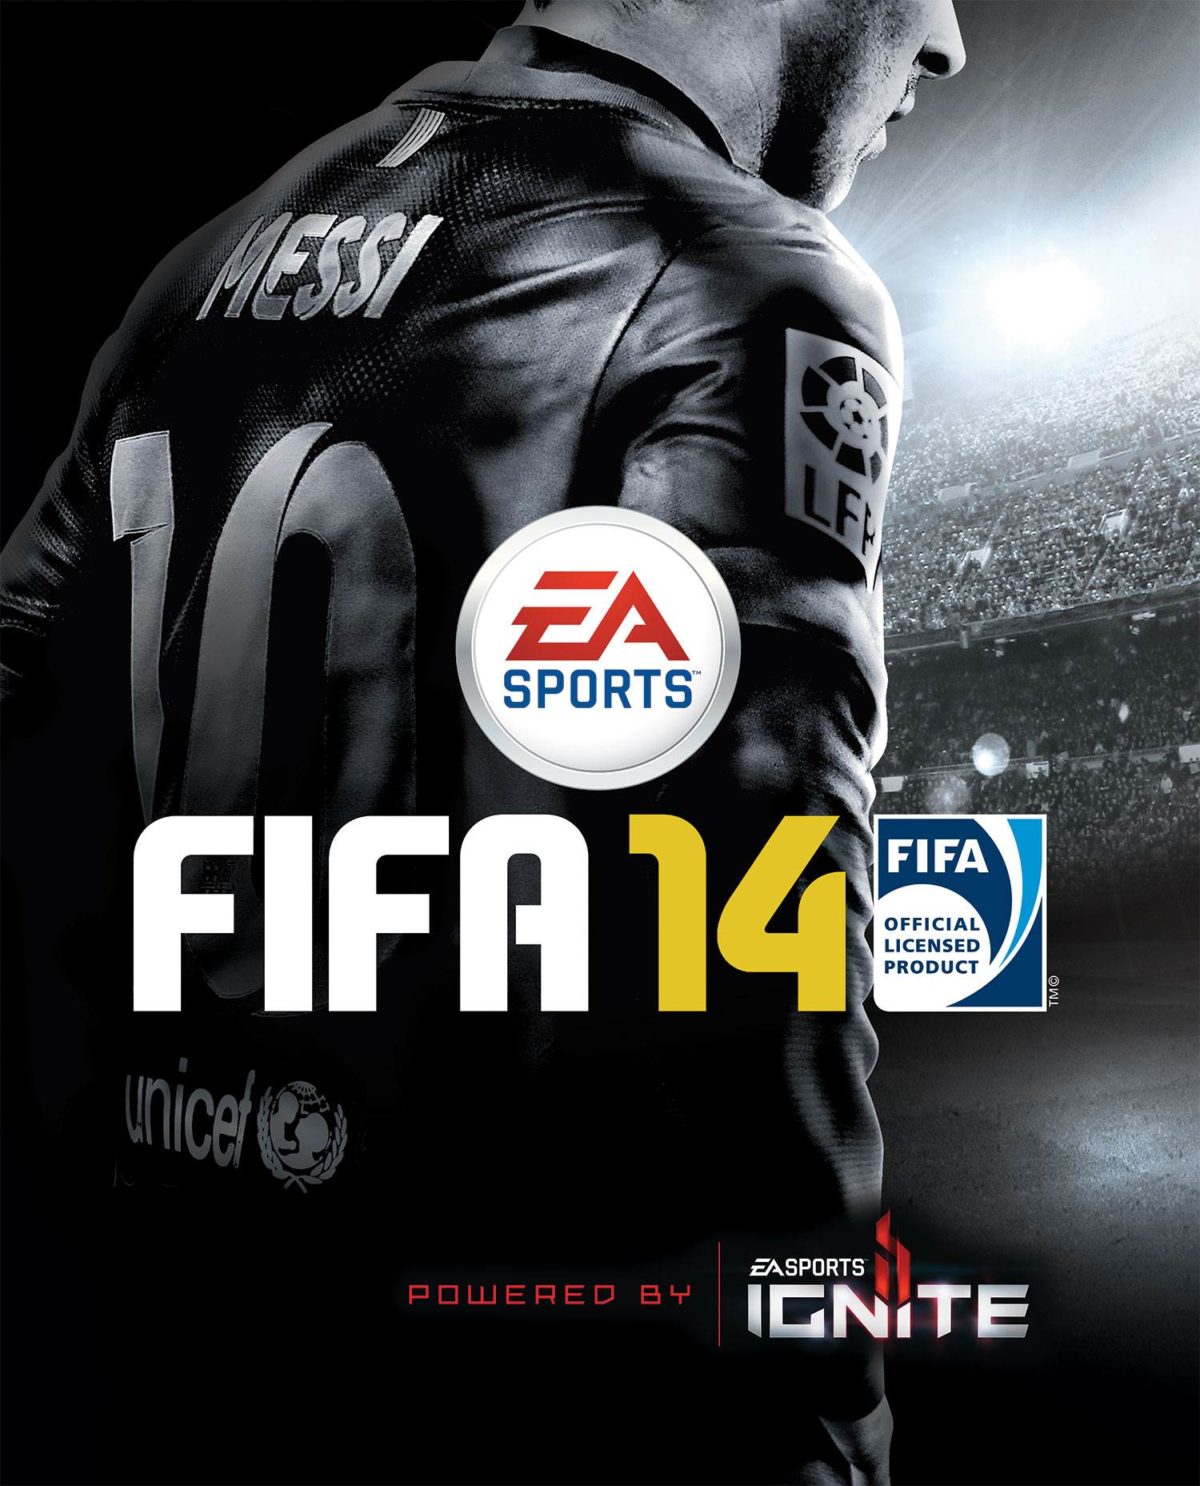 FIFA 14 WALLPAPERS IN HD « GamingBolt.com: Video Game News …